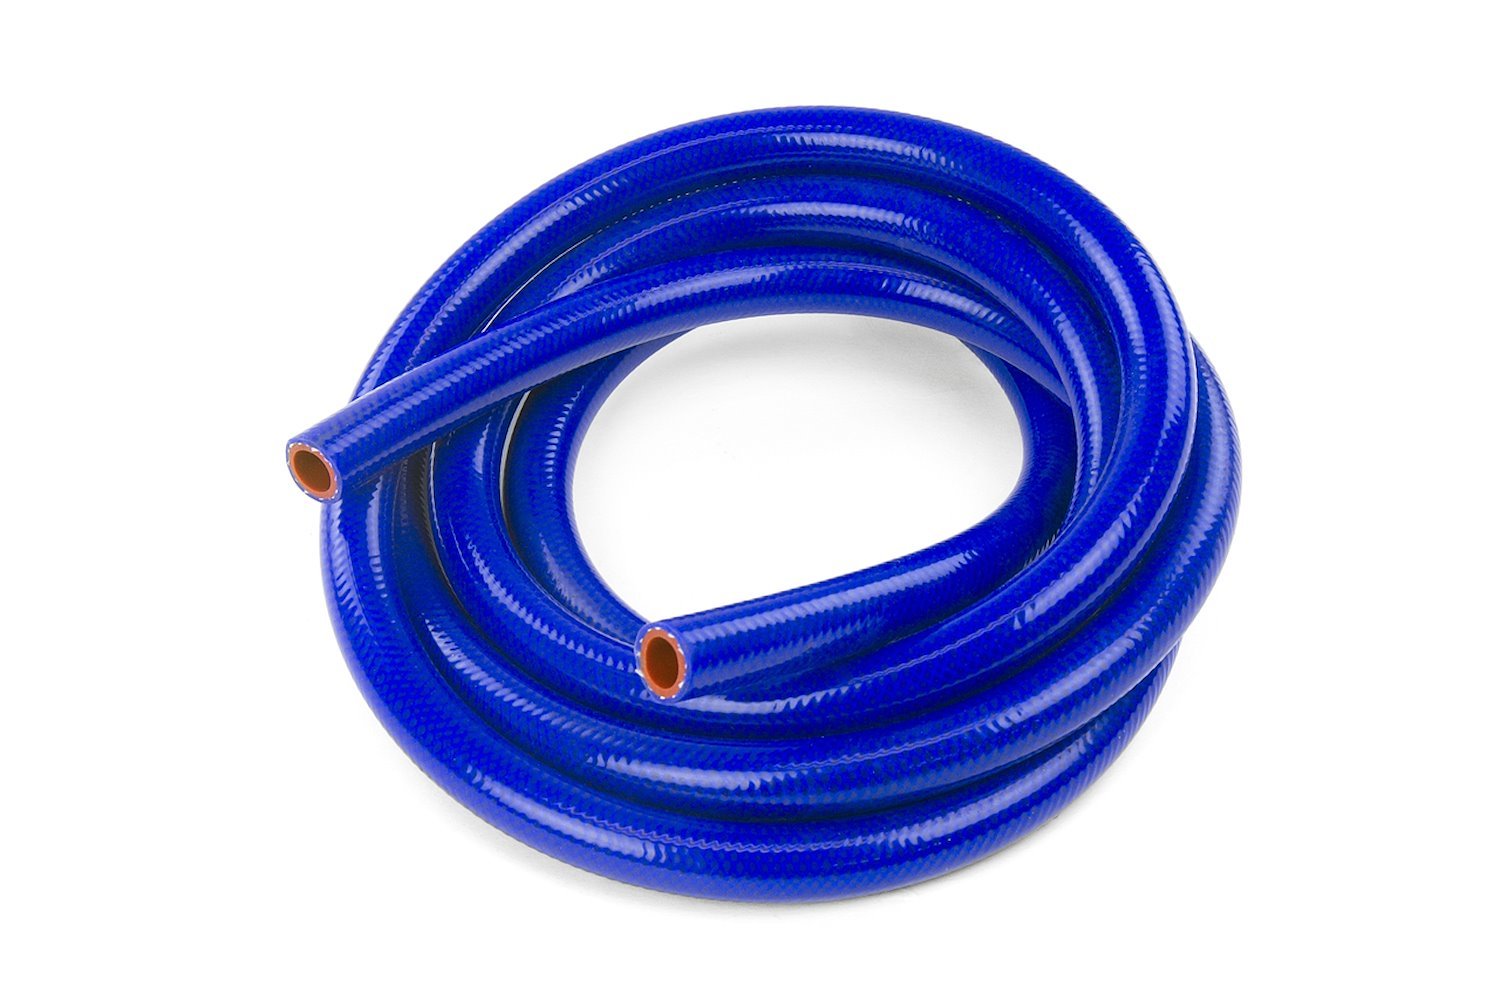 HTHH-100-BLUEx10 Silicone Heater Hose Tubing, High-Temp 1-Ply Reinforced, 1 in. ID, 10 ft. Roll, Blue